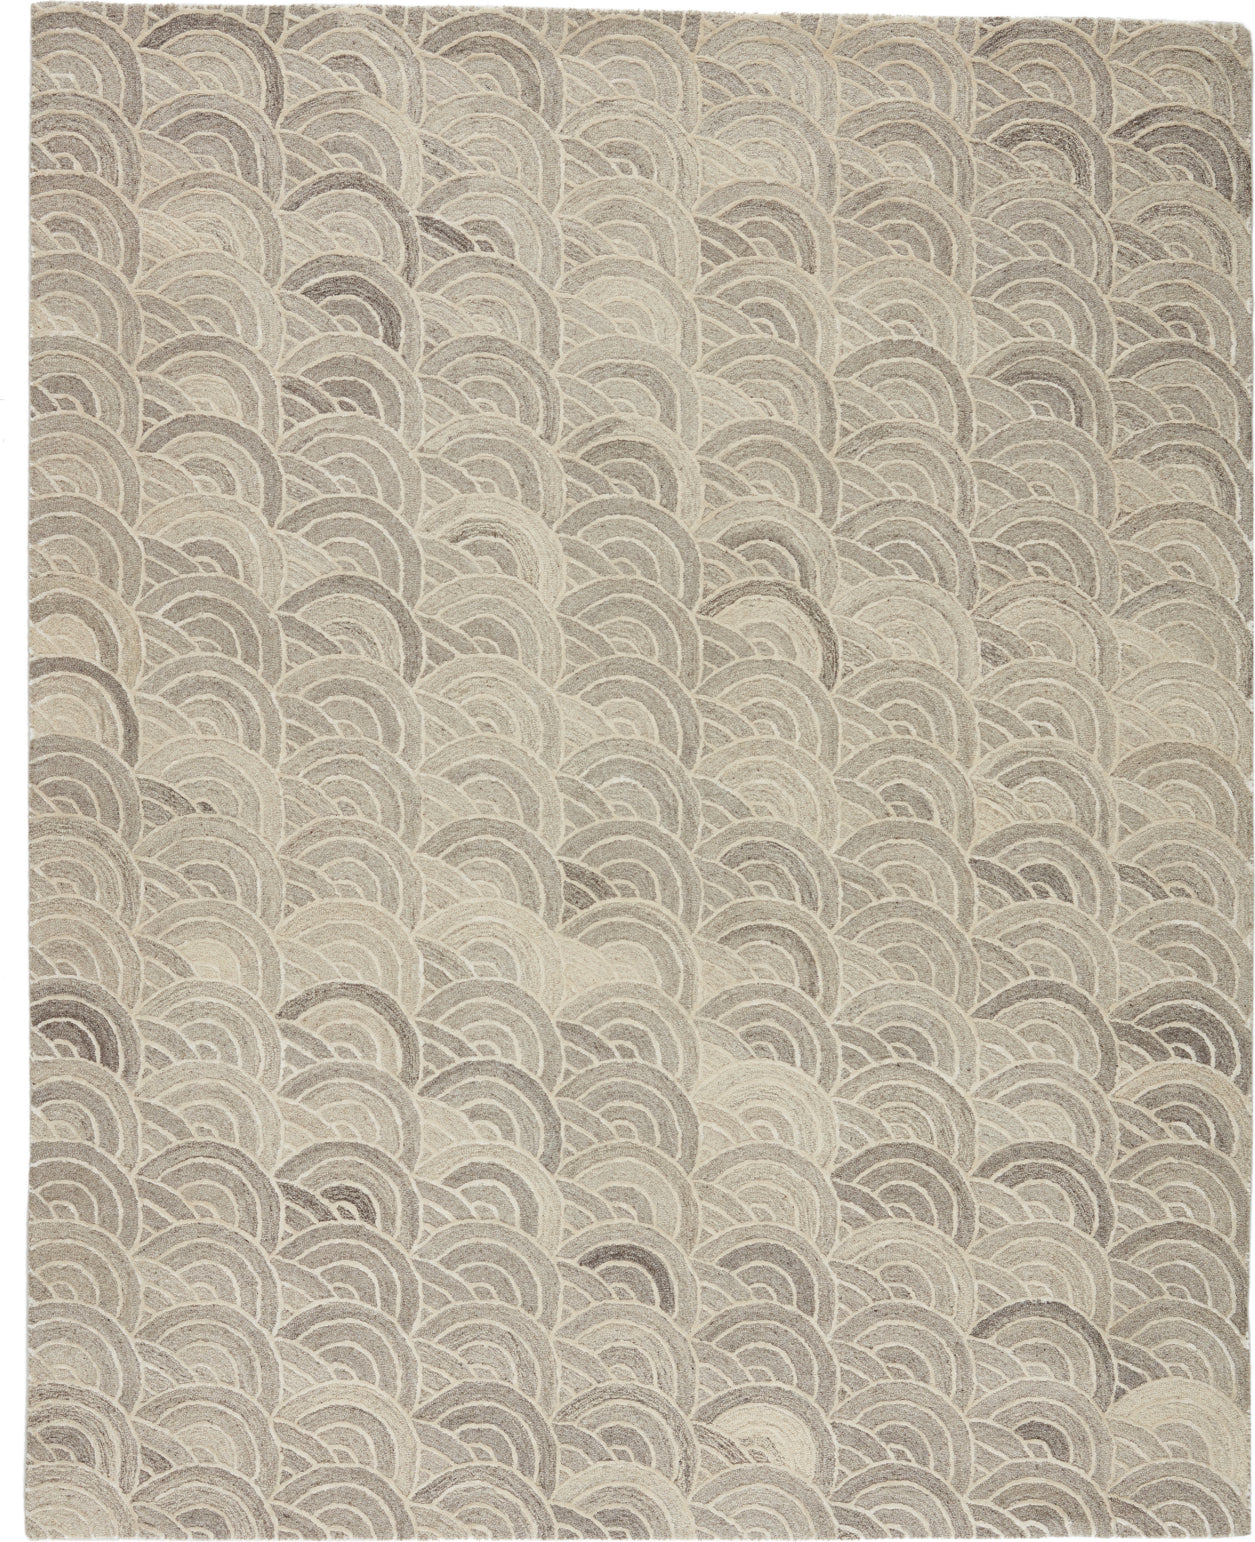 Jaipur Living Pathways by Verde Home Tokyo PVH02 Gray/Ivory Area Rug - Top Down